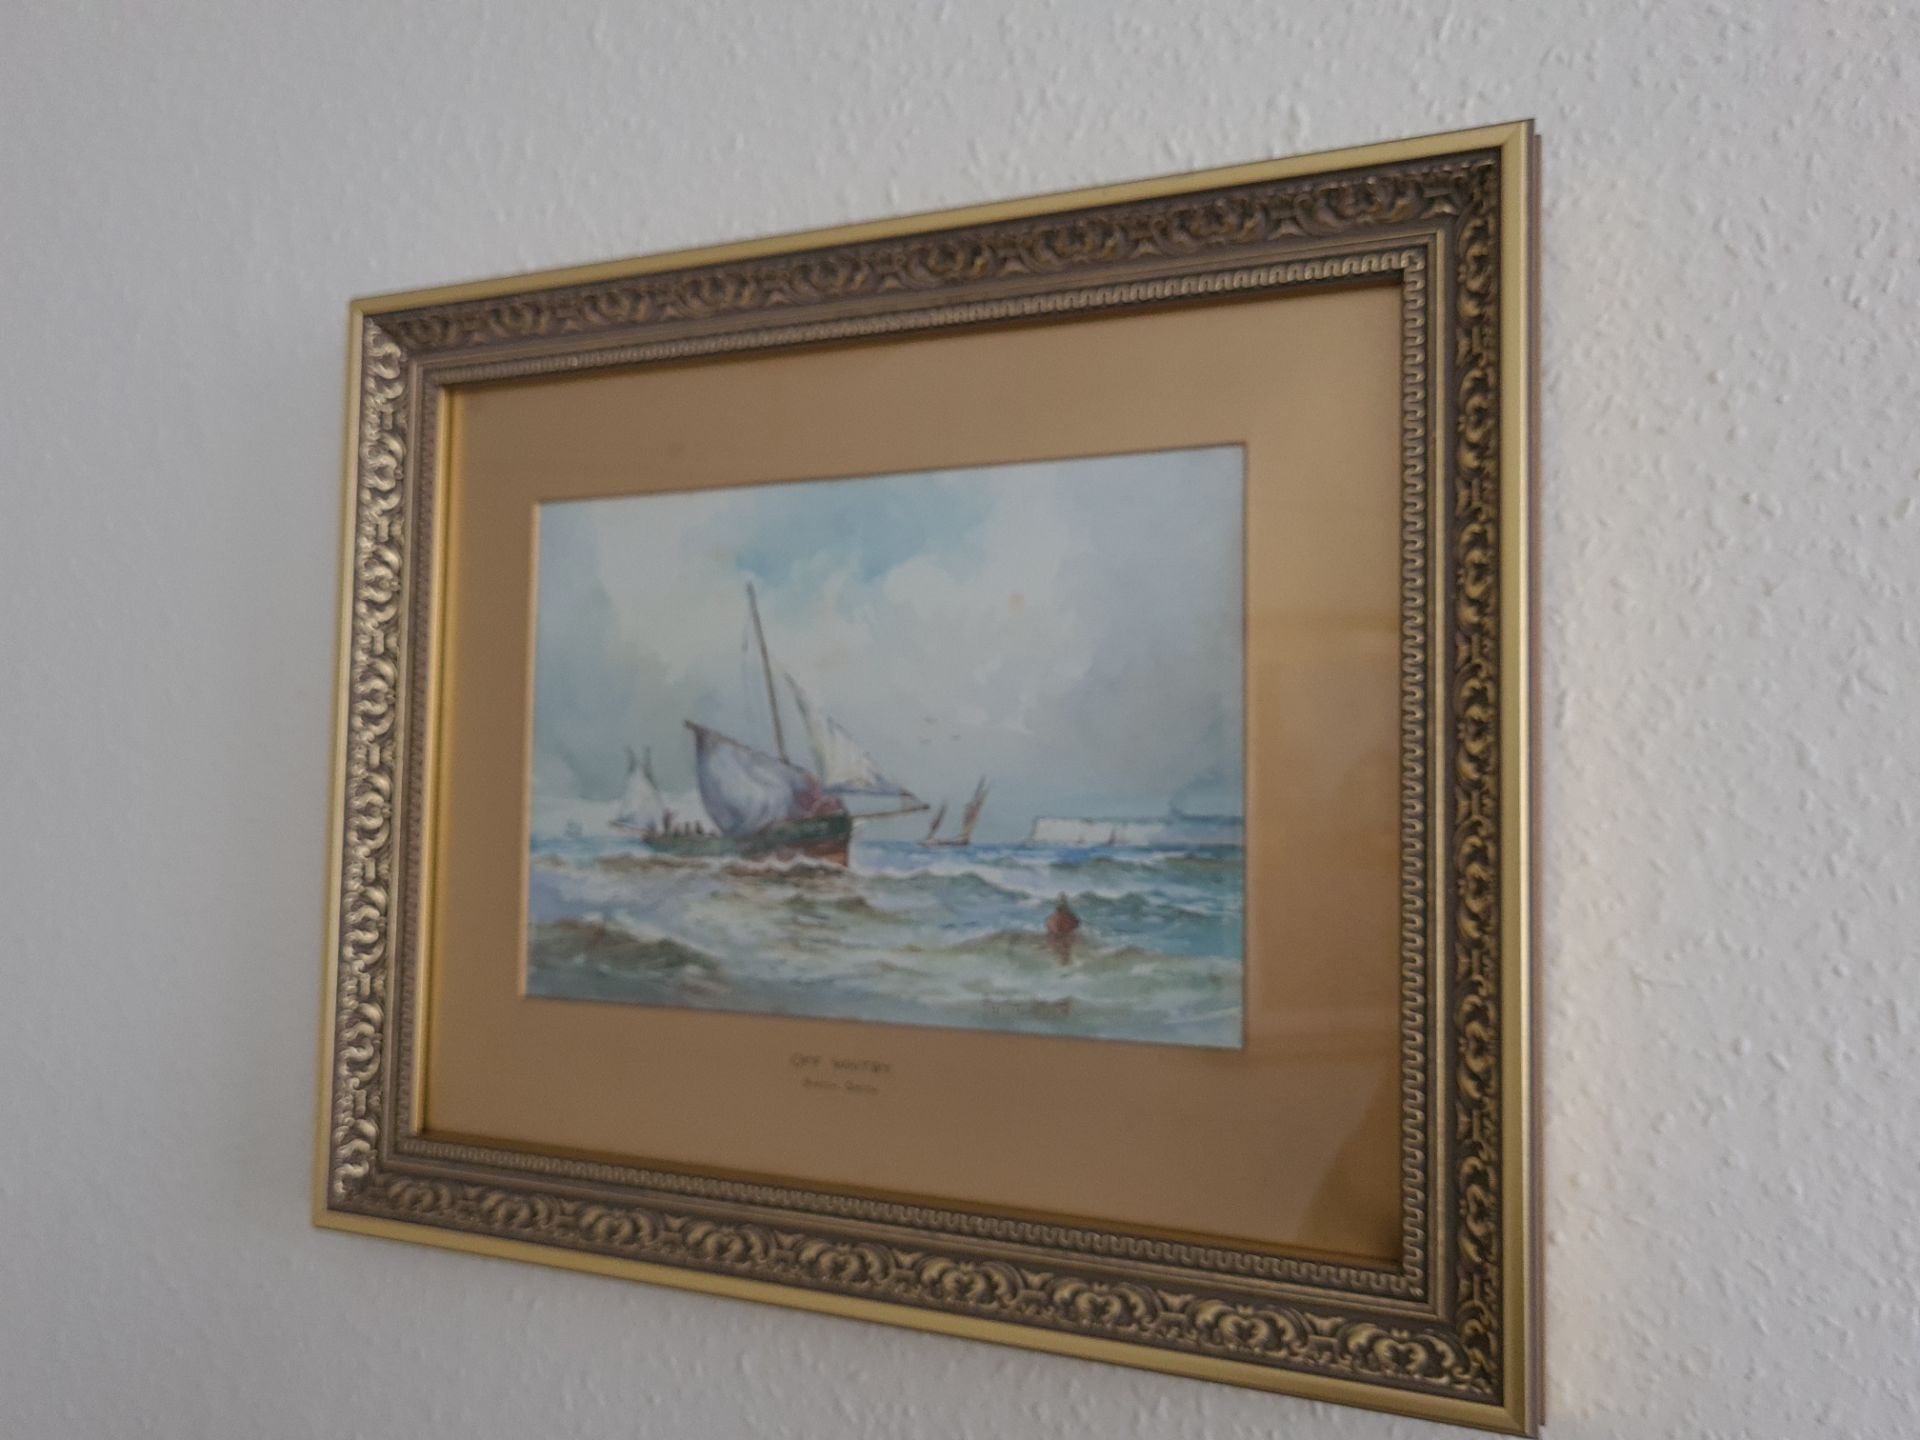 Signed and Titled Framed Watercolour 'Off Whitby' by Anton Smith, 37cm x 45cm